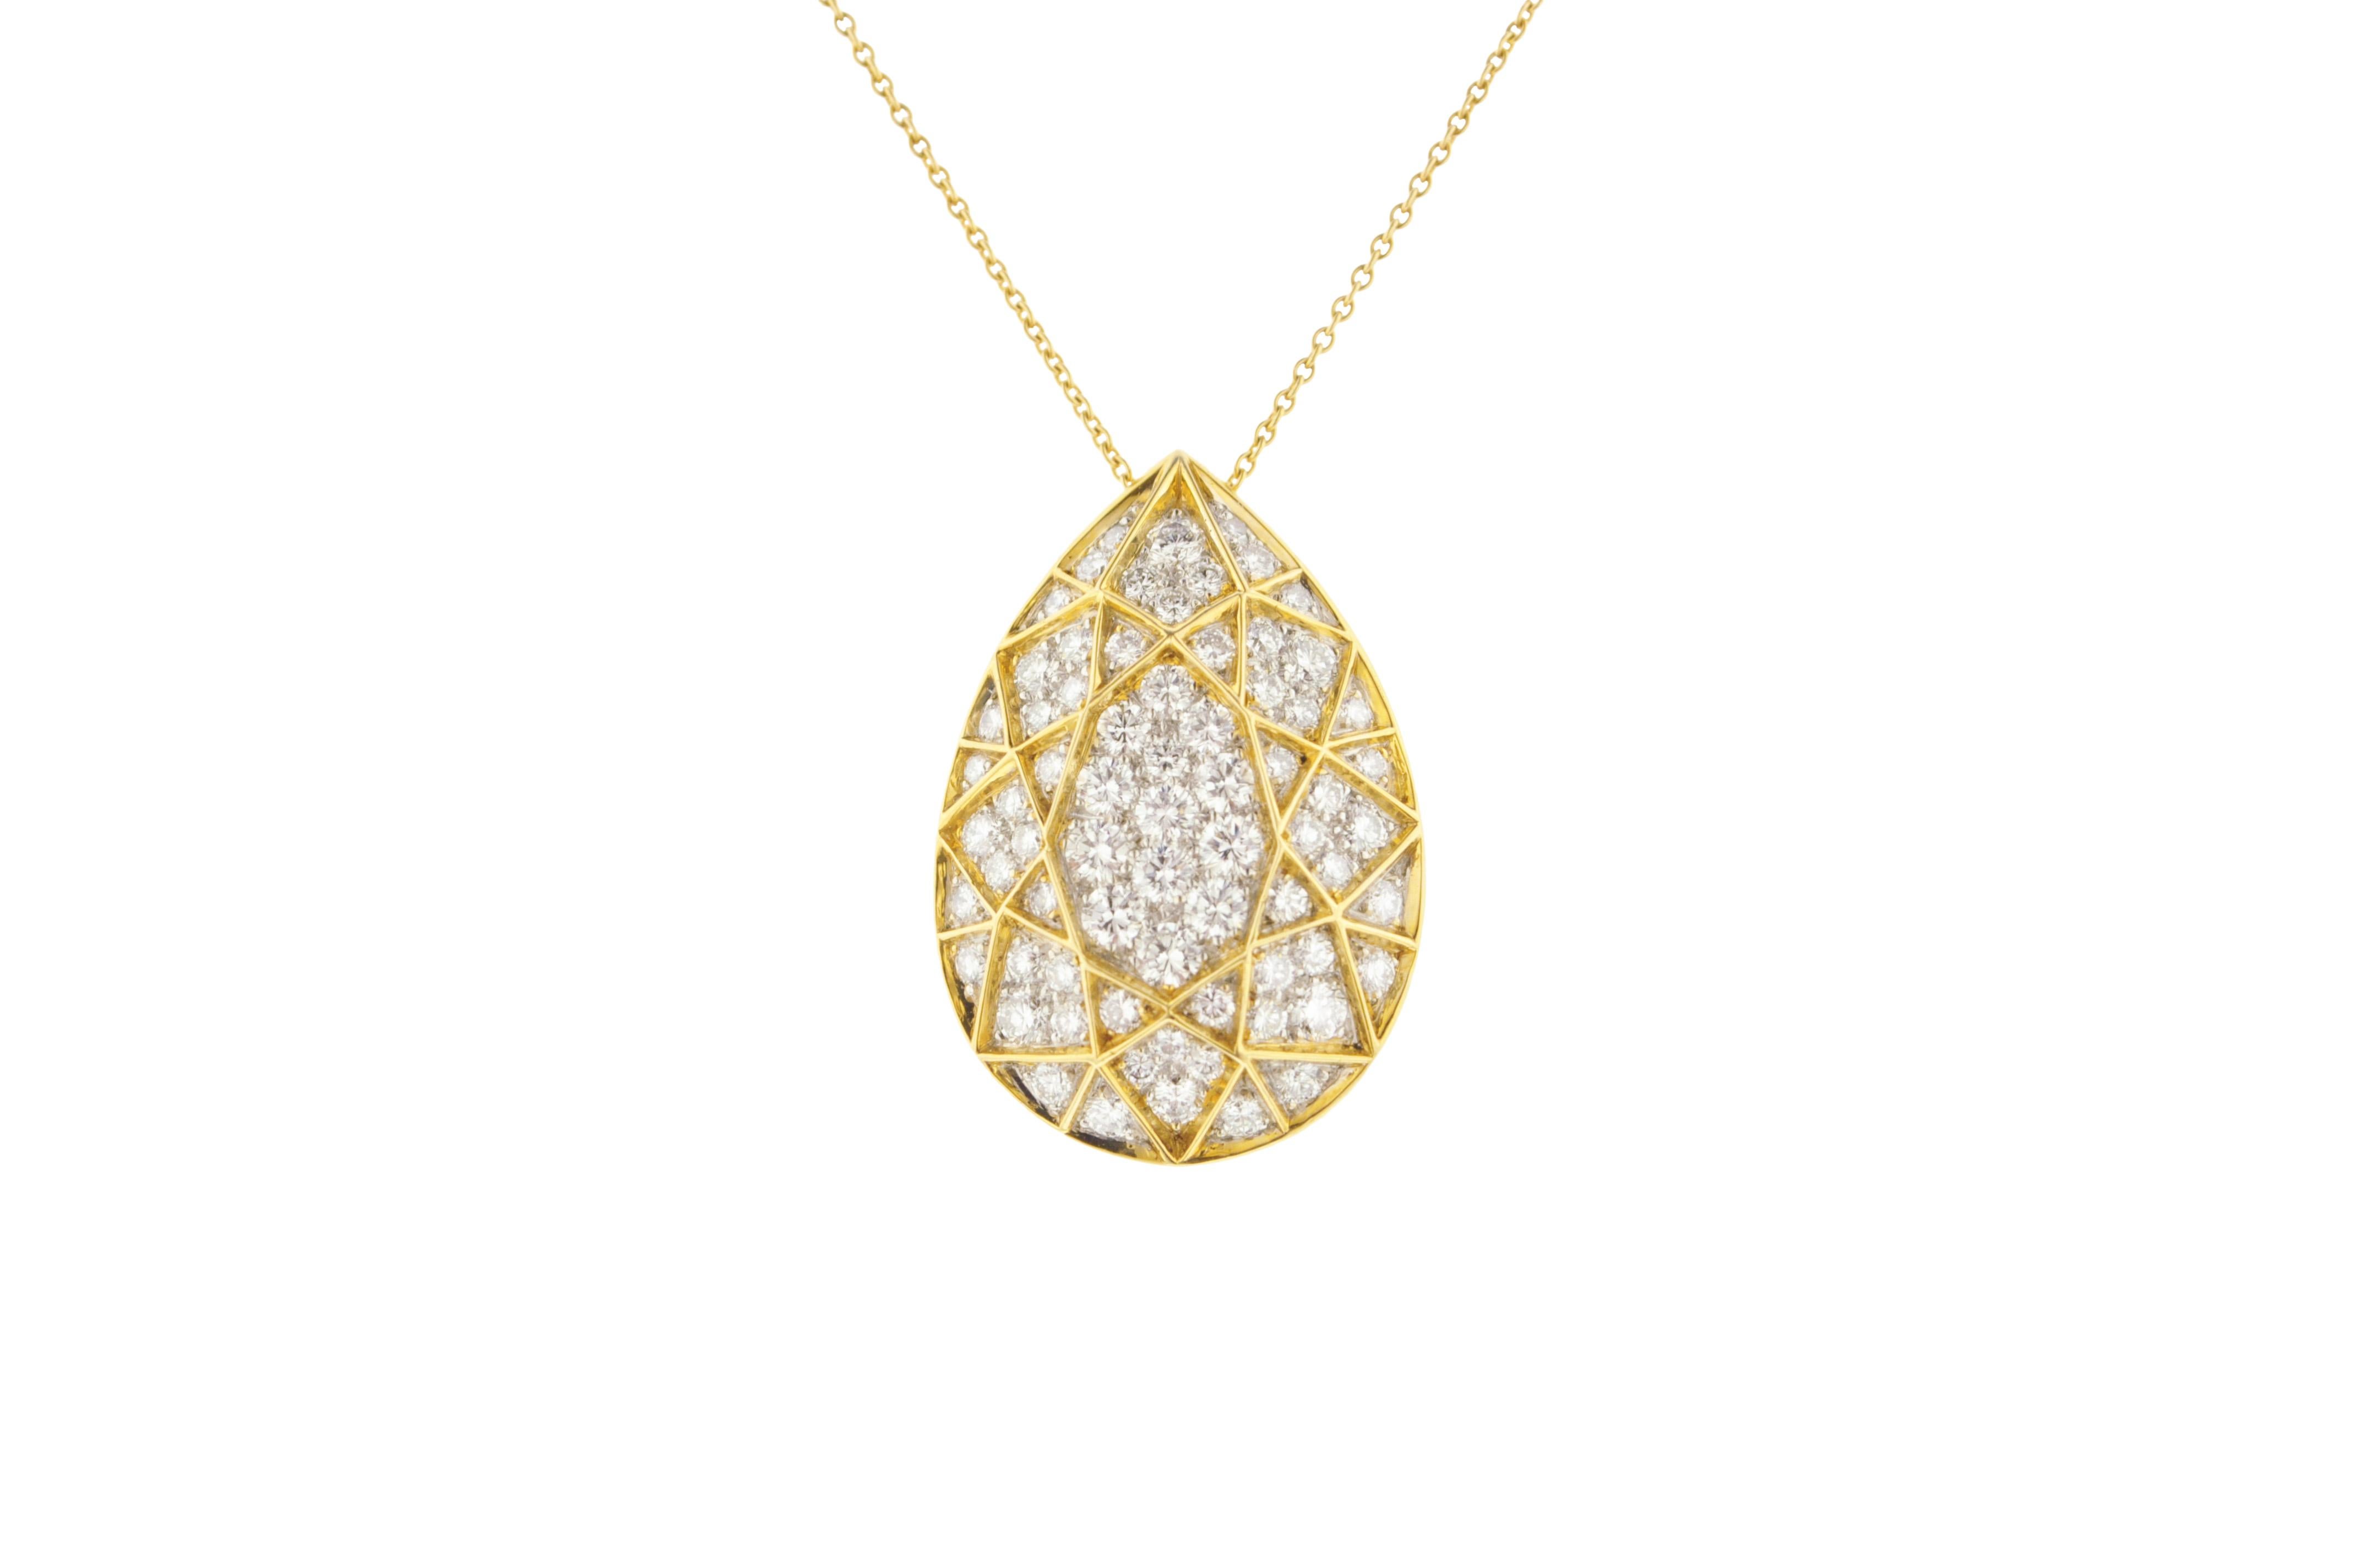 Estate 18K yellow gold Elsa Peretti for Tiffany & Co necklace featuring a diamond shaped pendant with approximately 5.65 carats of diamonds.

Signed Tiffany & Co., Peretti

Chain length: 16 inches
Pendant length: 1 1/4 inch width: 3/4 inch